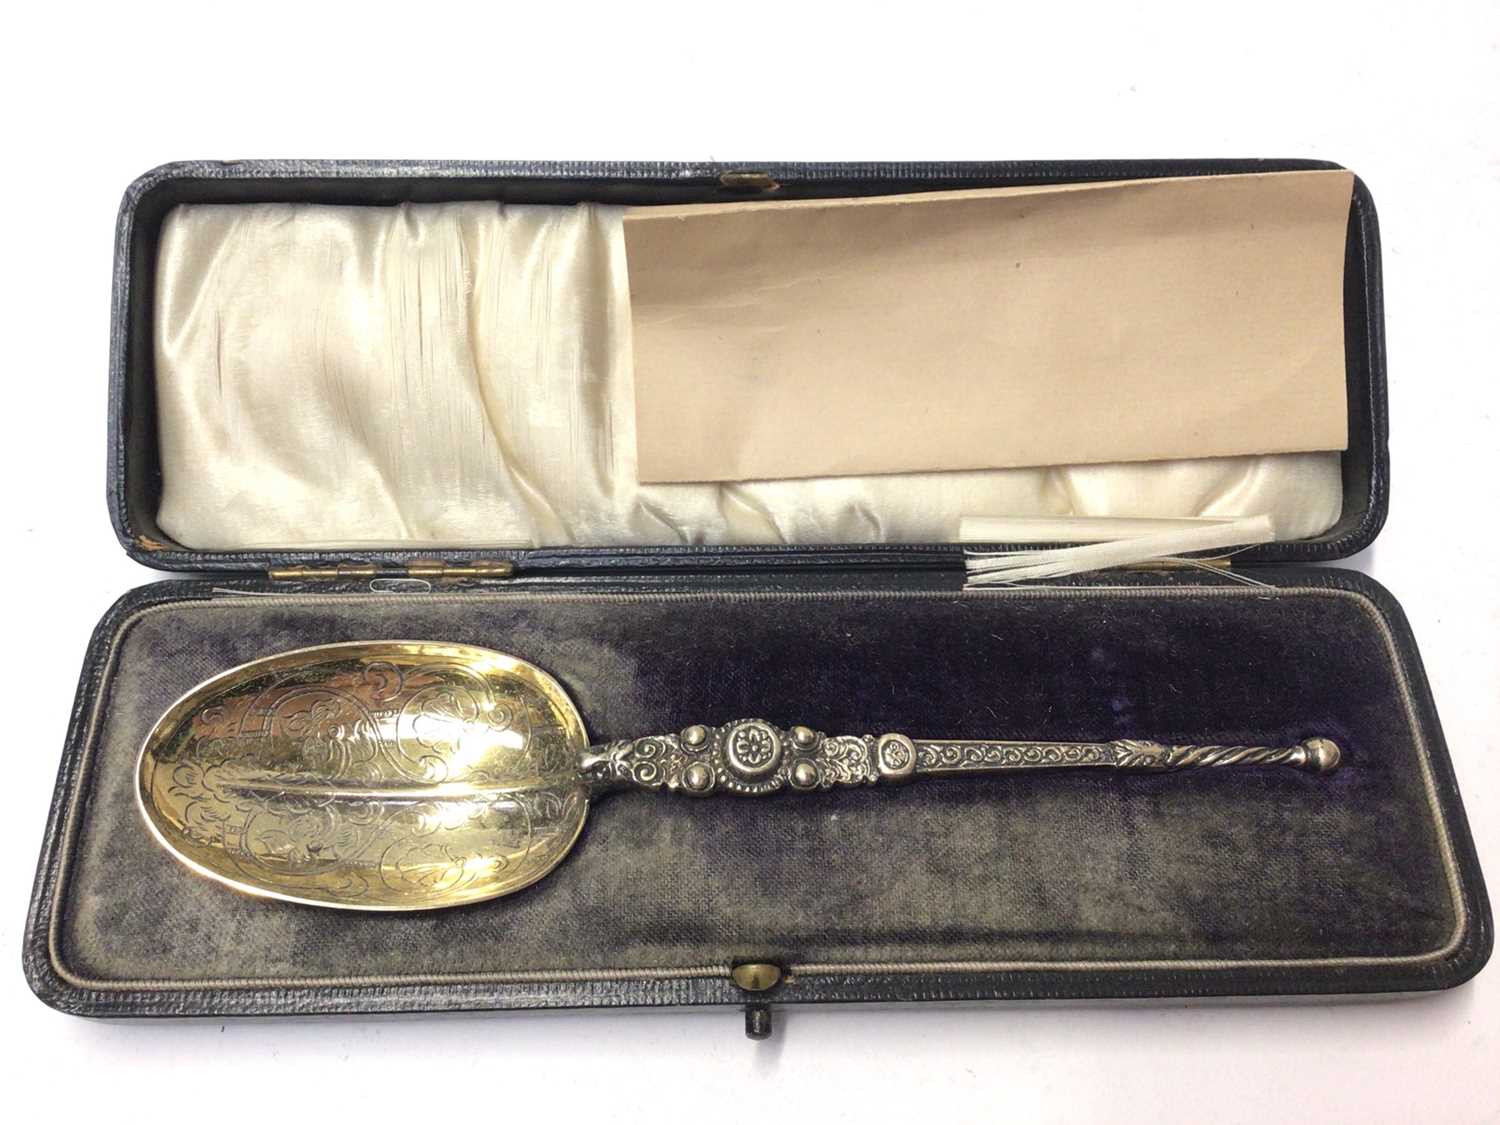 Lot 287 - Naval Interest- George V silver gilt annointing spoon, engraved D.H.J. H.M.S./M L33 29 May 1919, (London 1910), maker Reid & Sons, in fitted case, together with interesting letter of provenance.